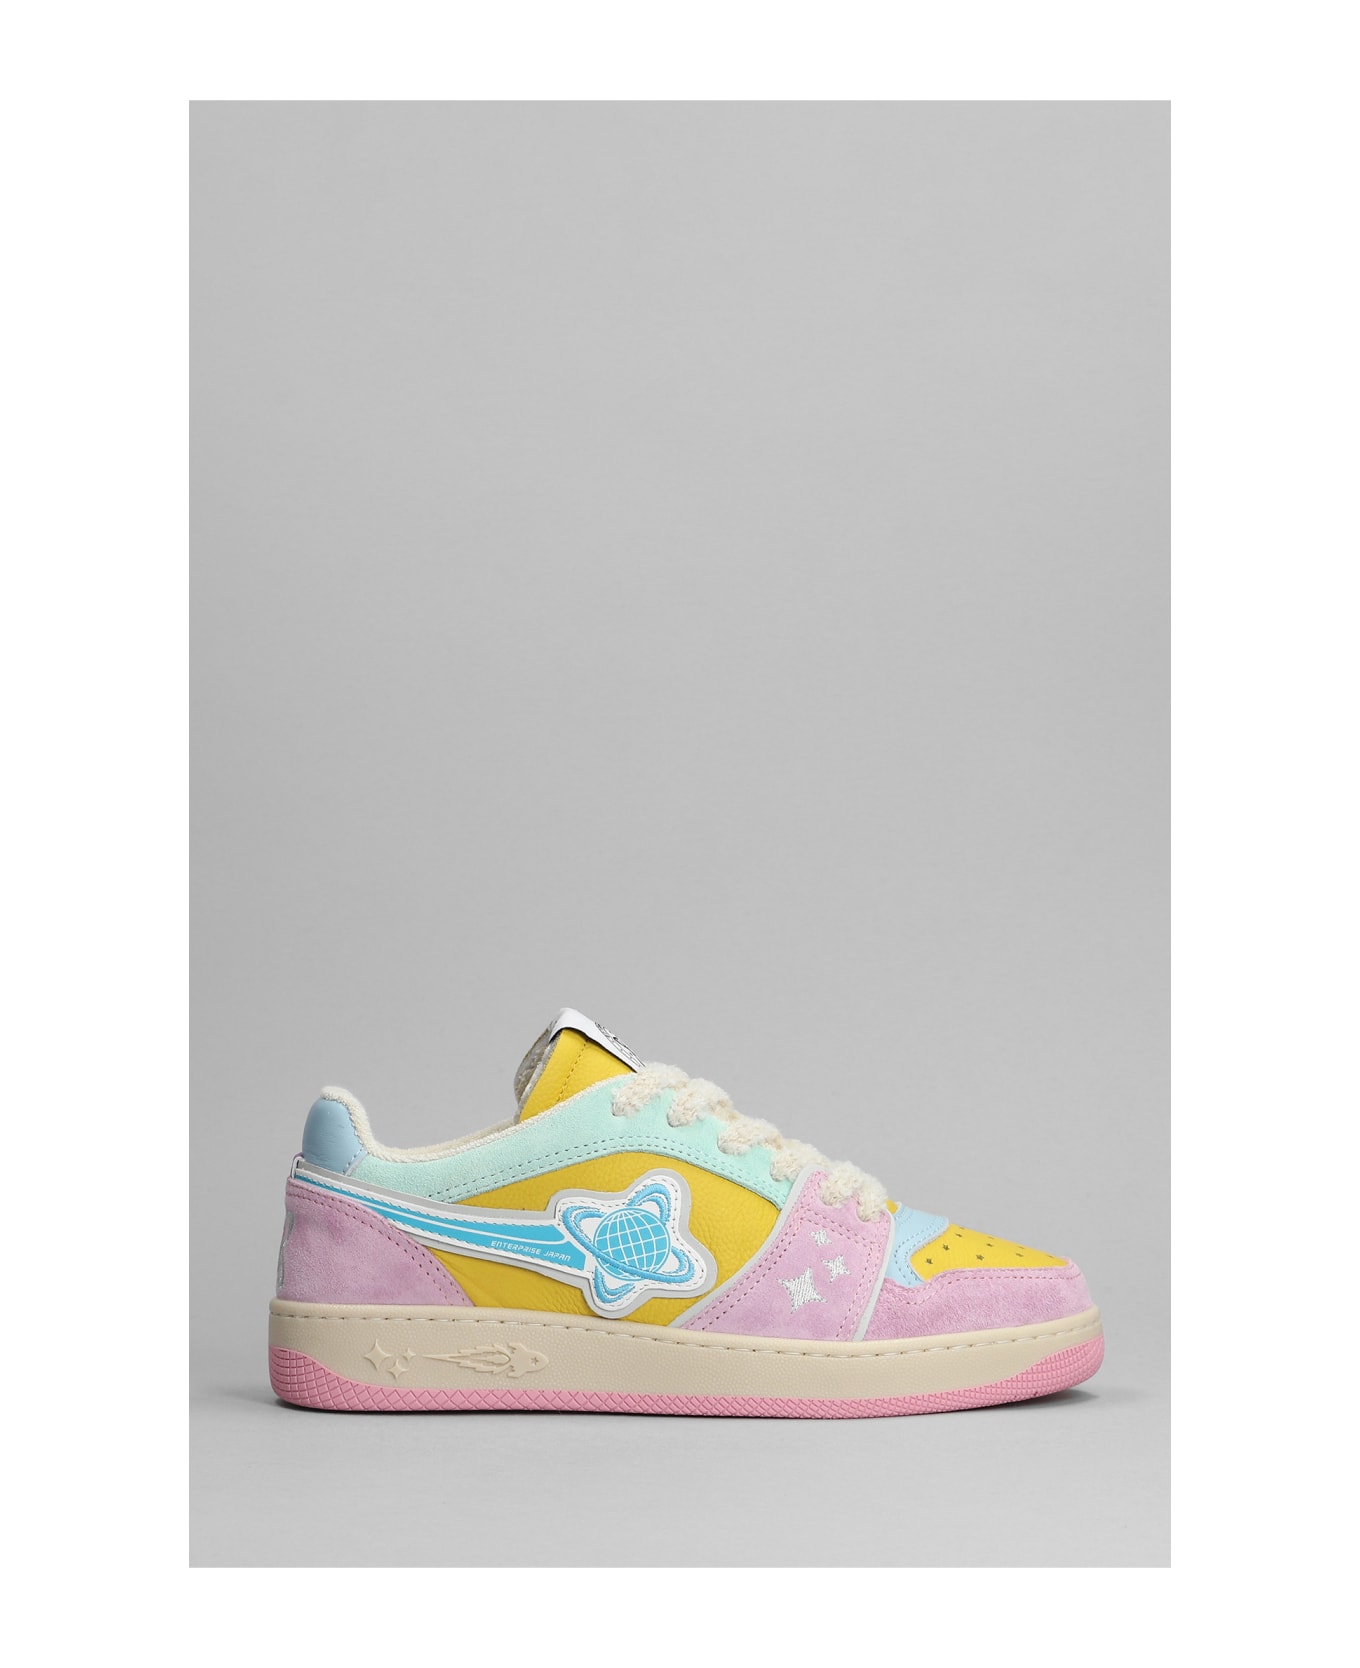 Enterprise Japan Sneakers In Rose-pink Suede And Leather - YELLOW/BLUE